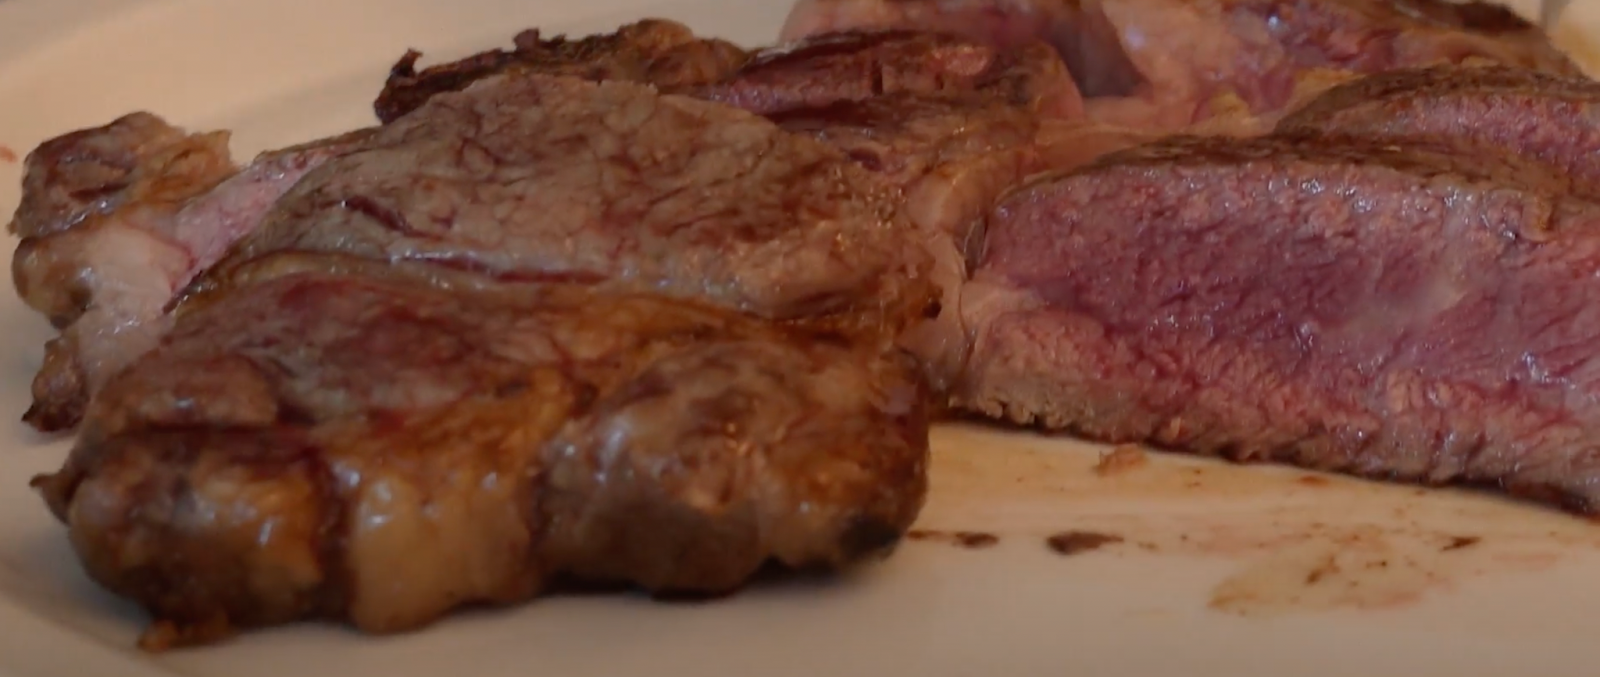 Recipes - 30 minute meals and organic recipes from Nutrafarms - Chef D’s Wood-fired Ribeye